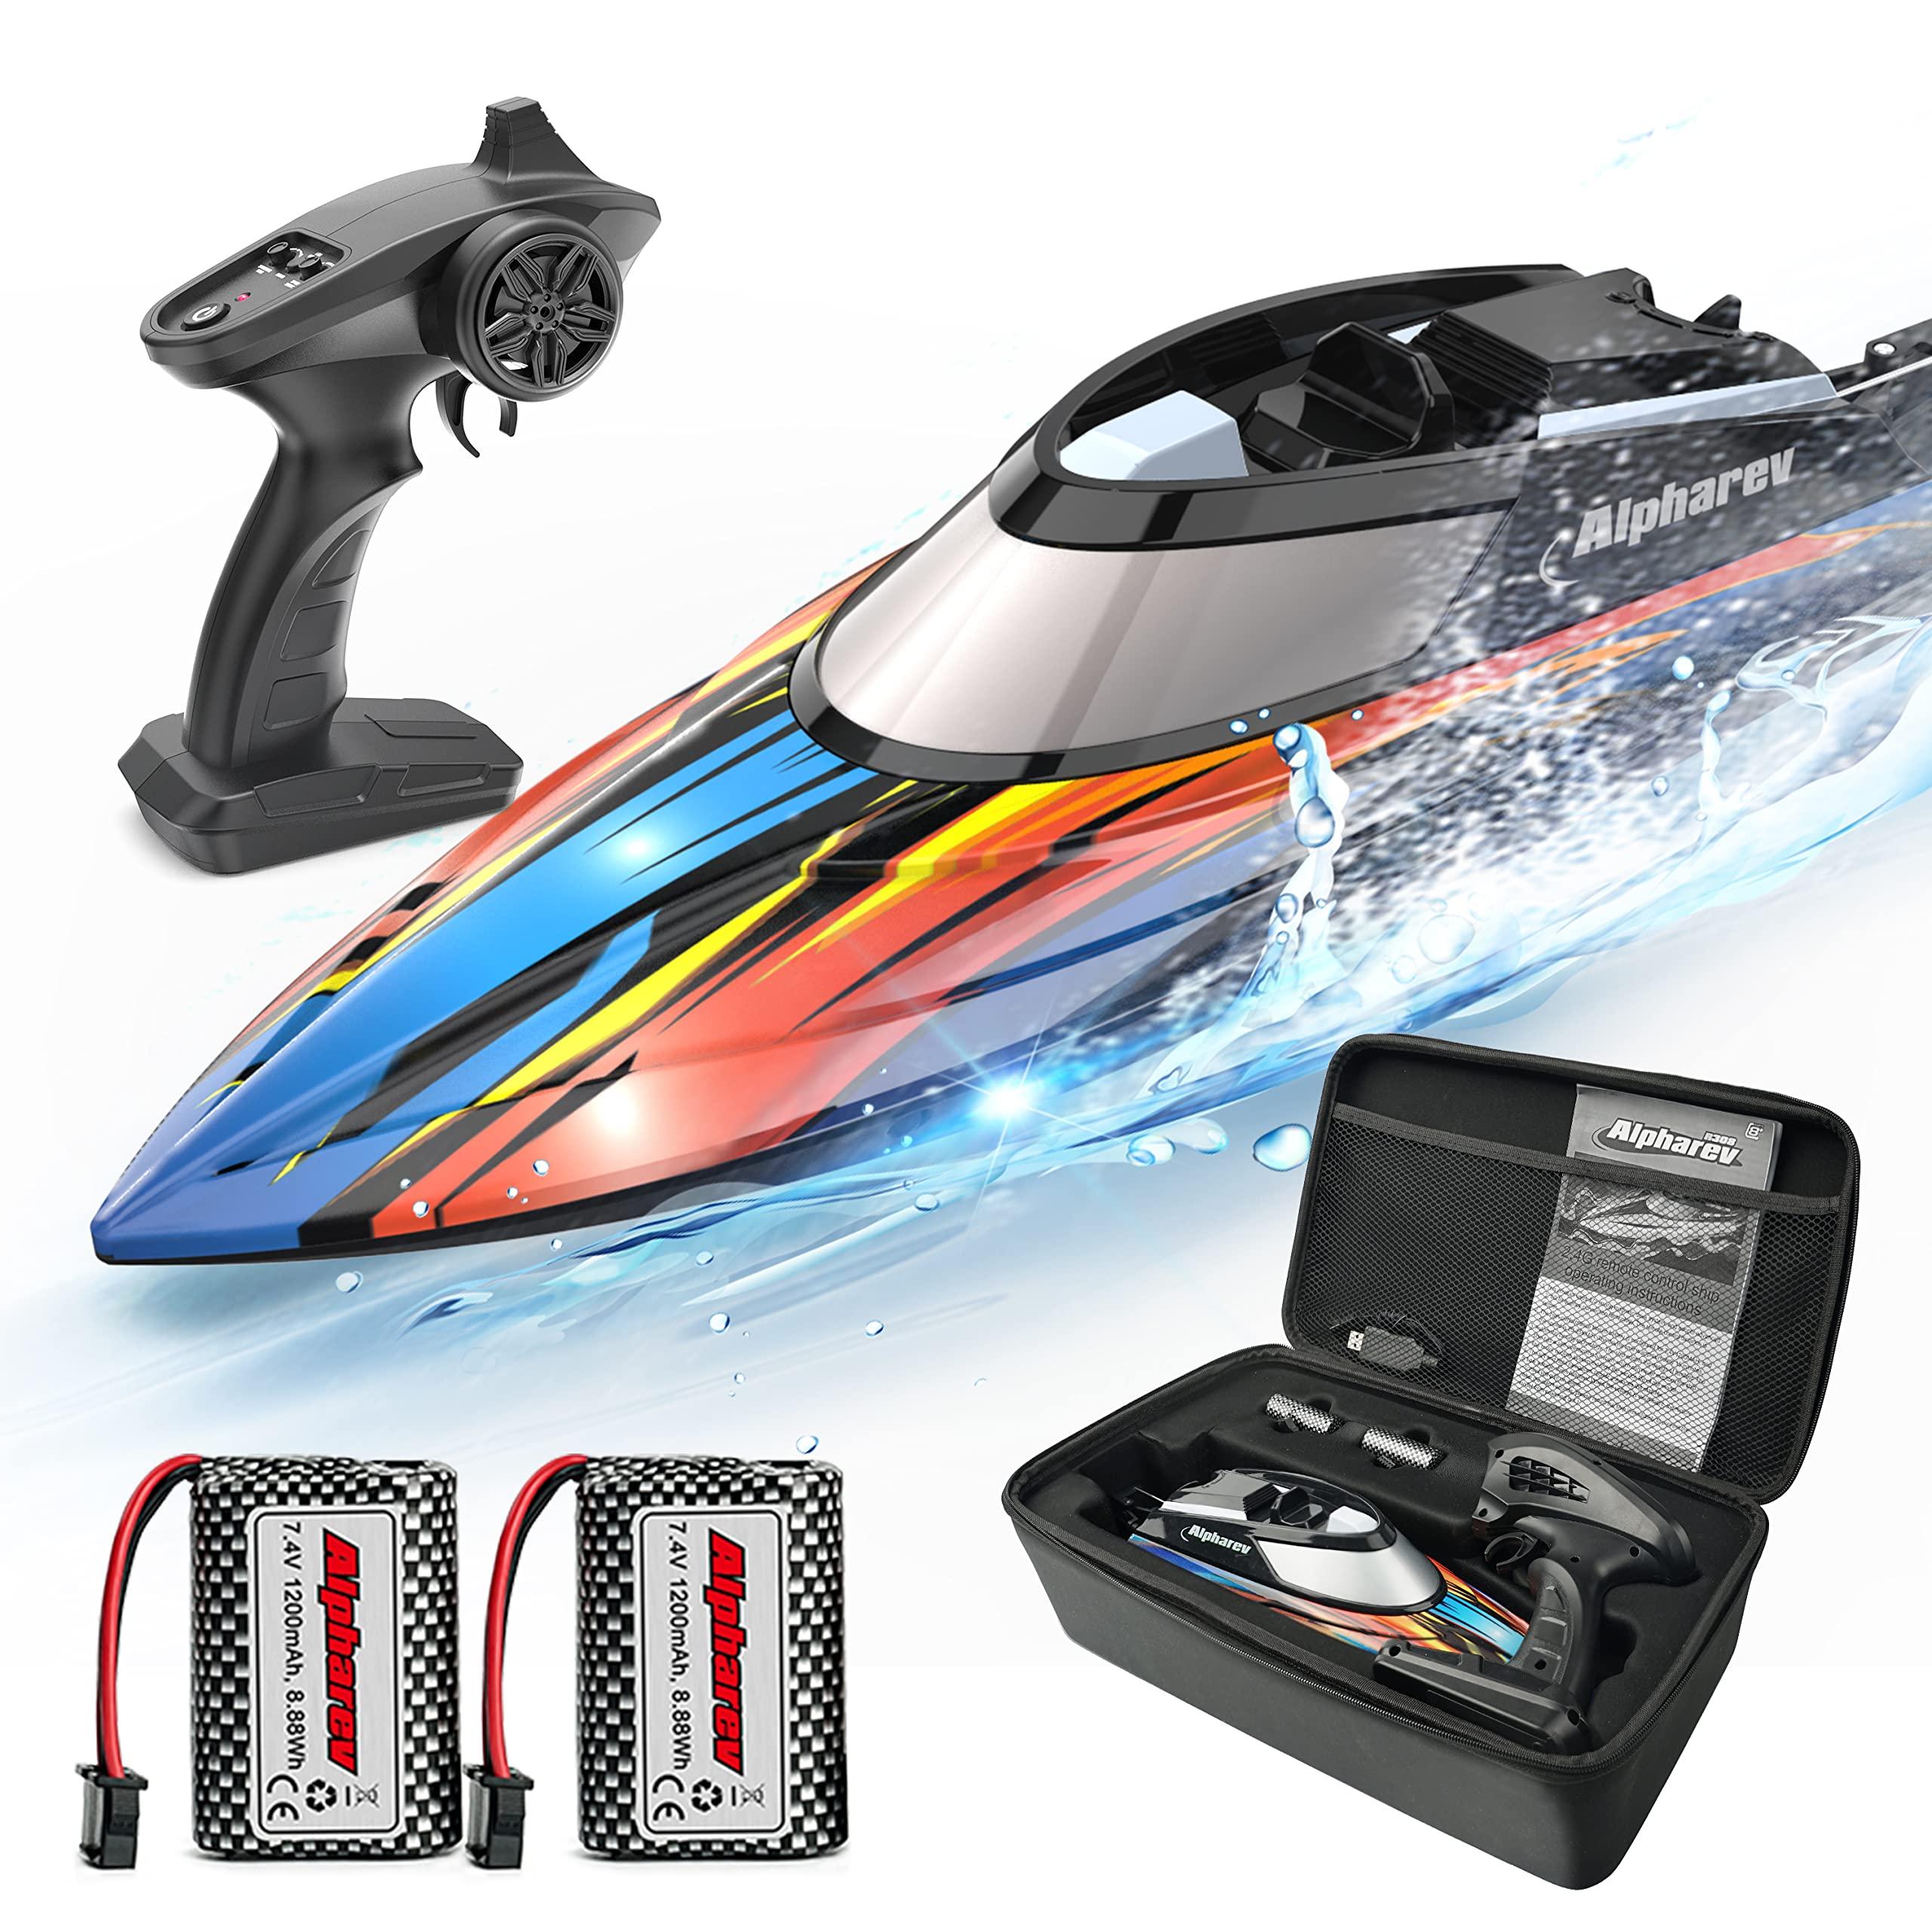 Rc Boat Range: Choosing the Right RC Boat Size, Material, and Features for Your Skill Level and Preferences